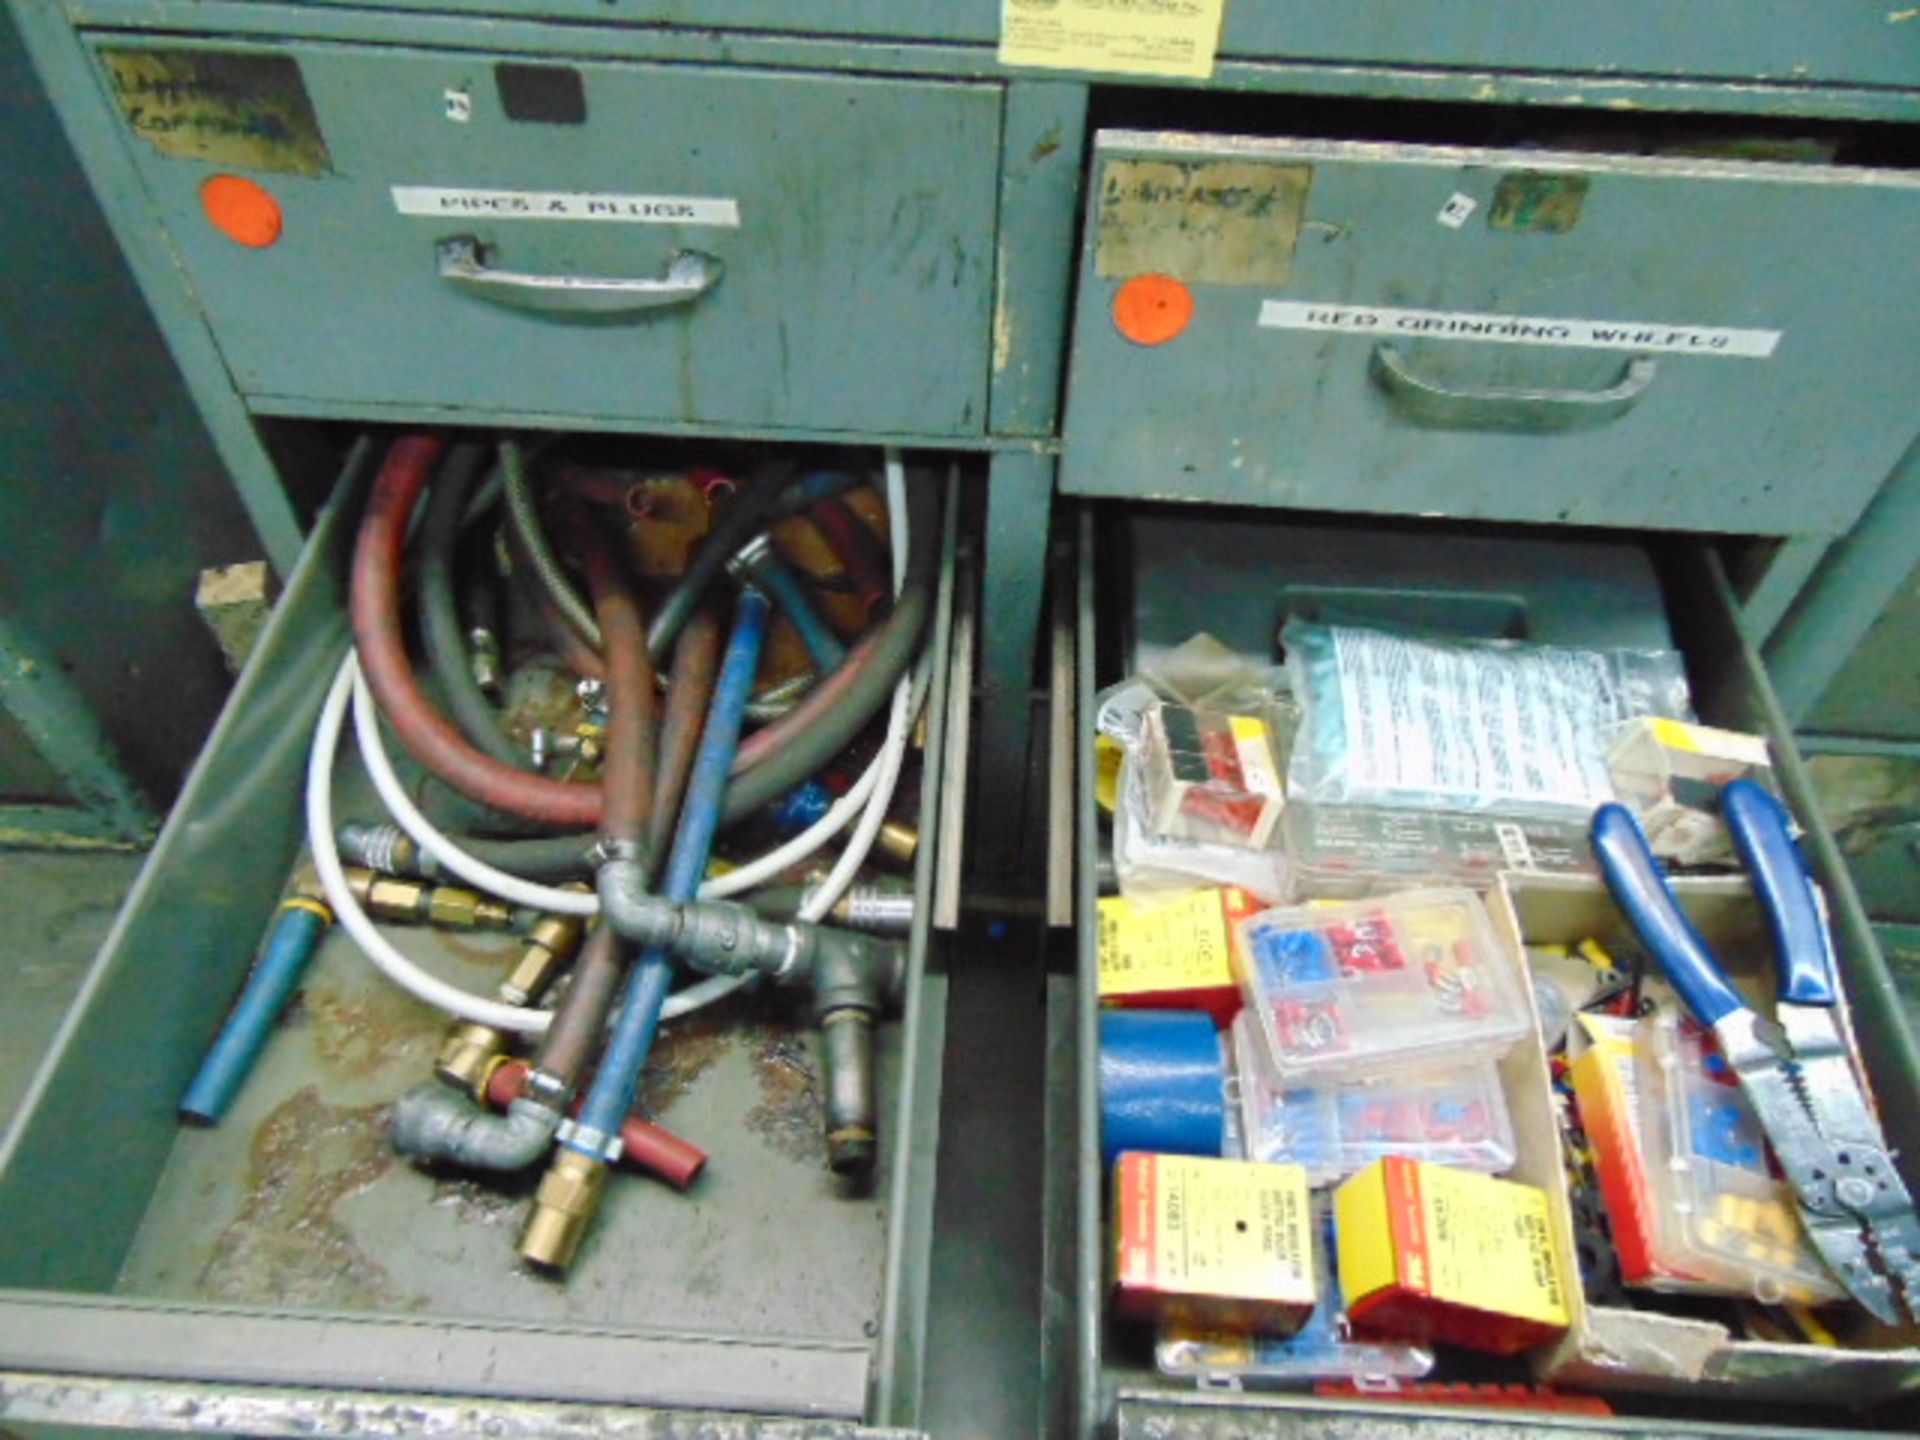 LOT CONSISTING OF: grinding wheels, hoses, electrical connections & misc., w/cabinet, assorted - Image 4 of 5